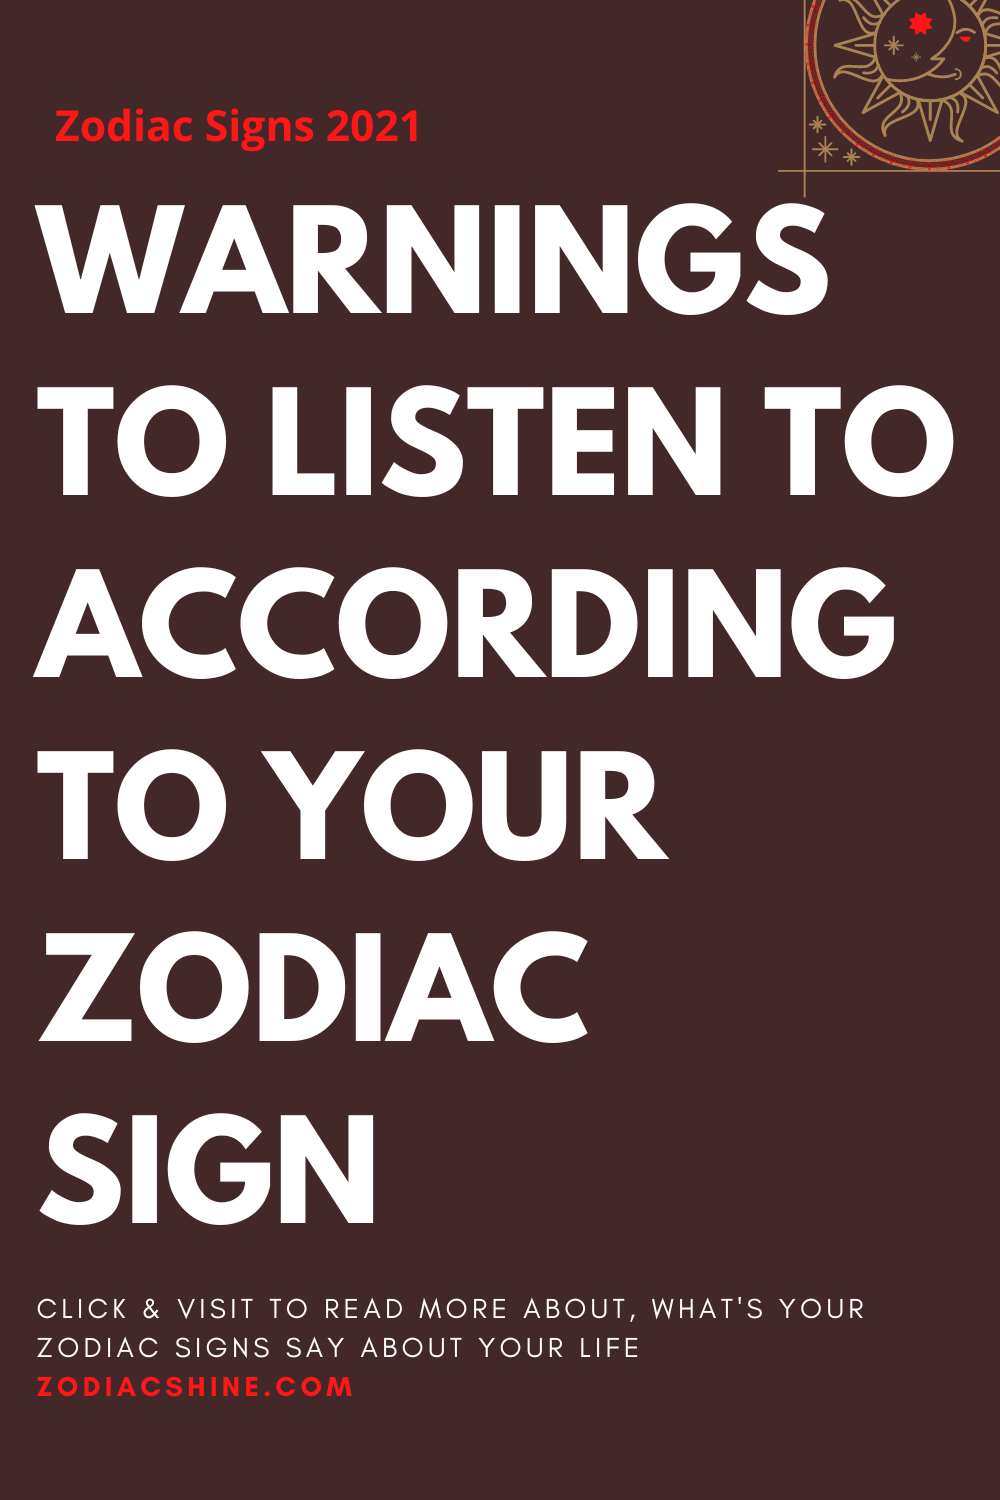 WARNINGS TO LISTEN TO ACCORDING TO YOUR ZODIAC SIGN